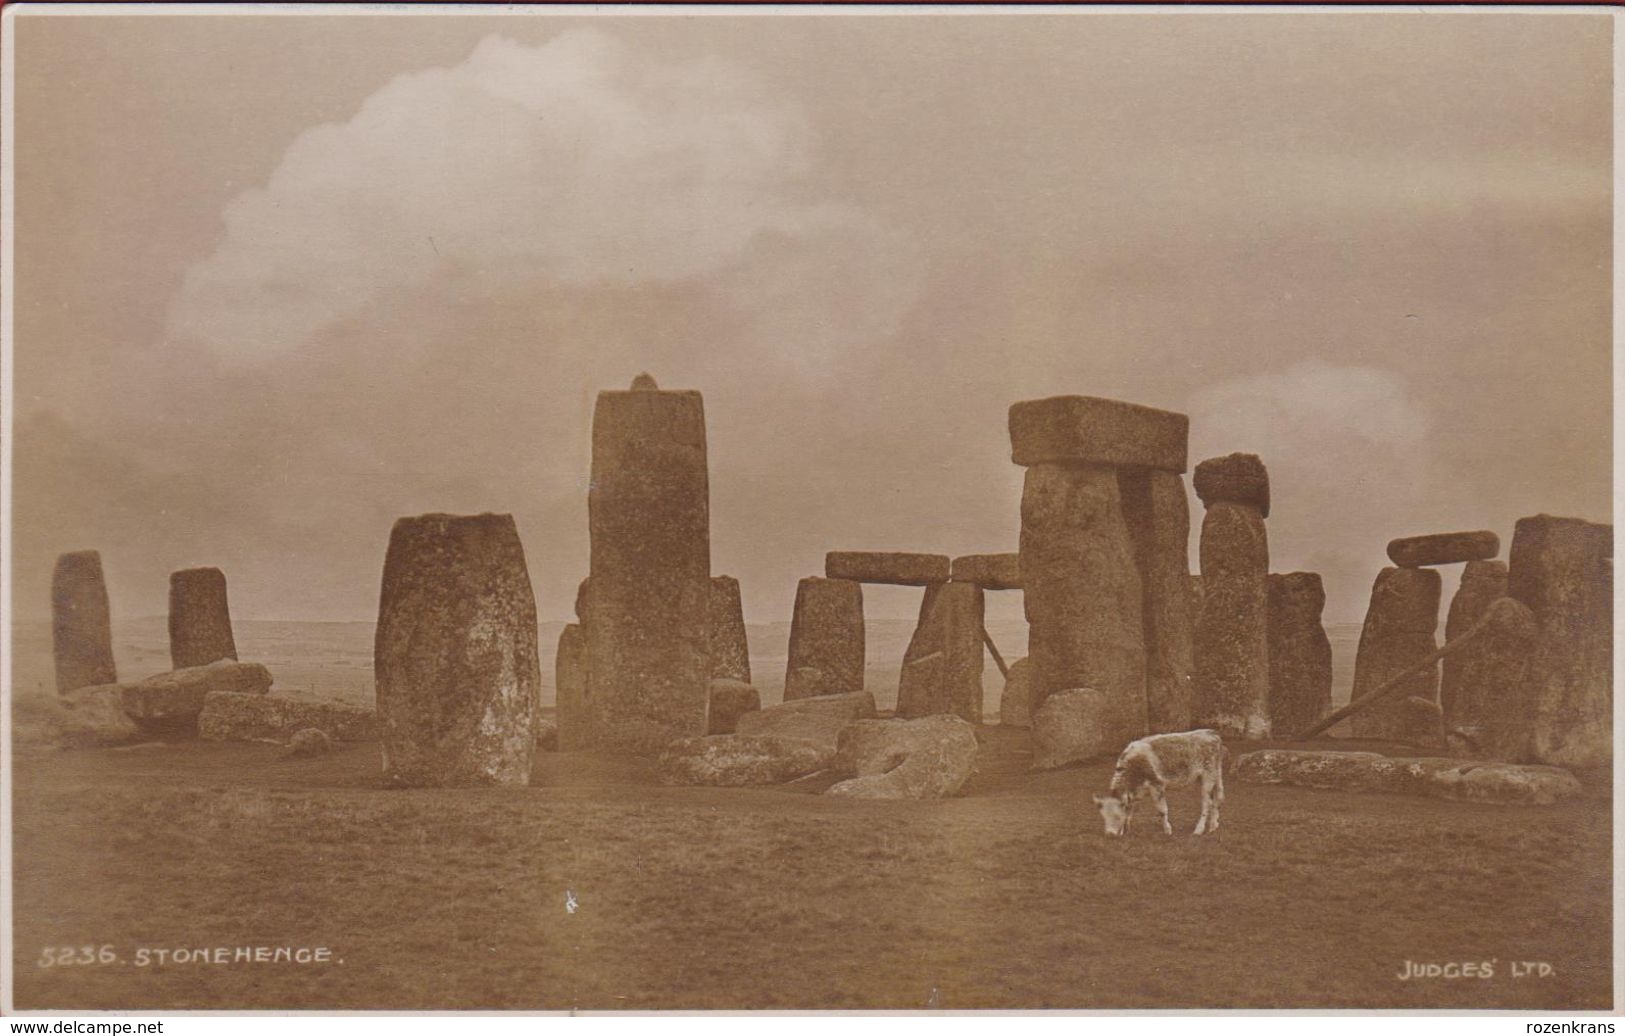 Very Old RARE Photo Card Stonehenge With Cow Judges Ltd Hastings 5236 Amesbury Wiltshire (In Very Good Condition) - Stonehenge